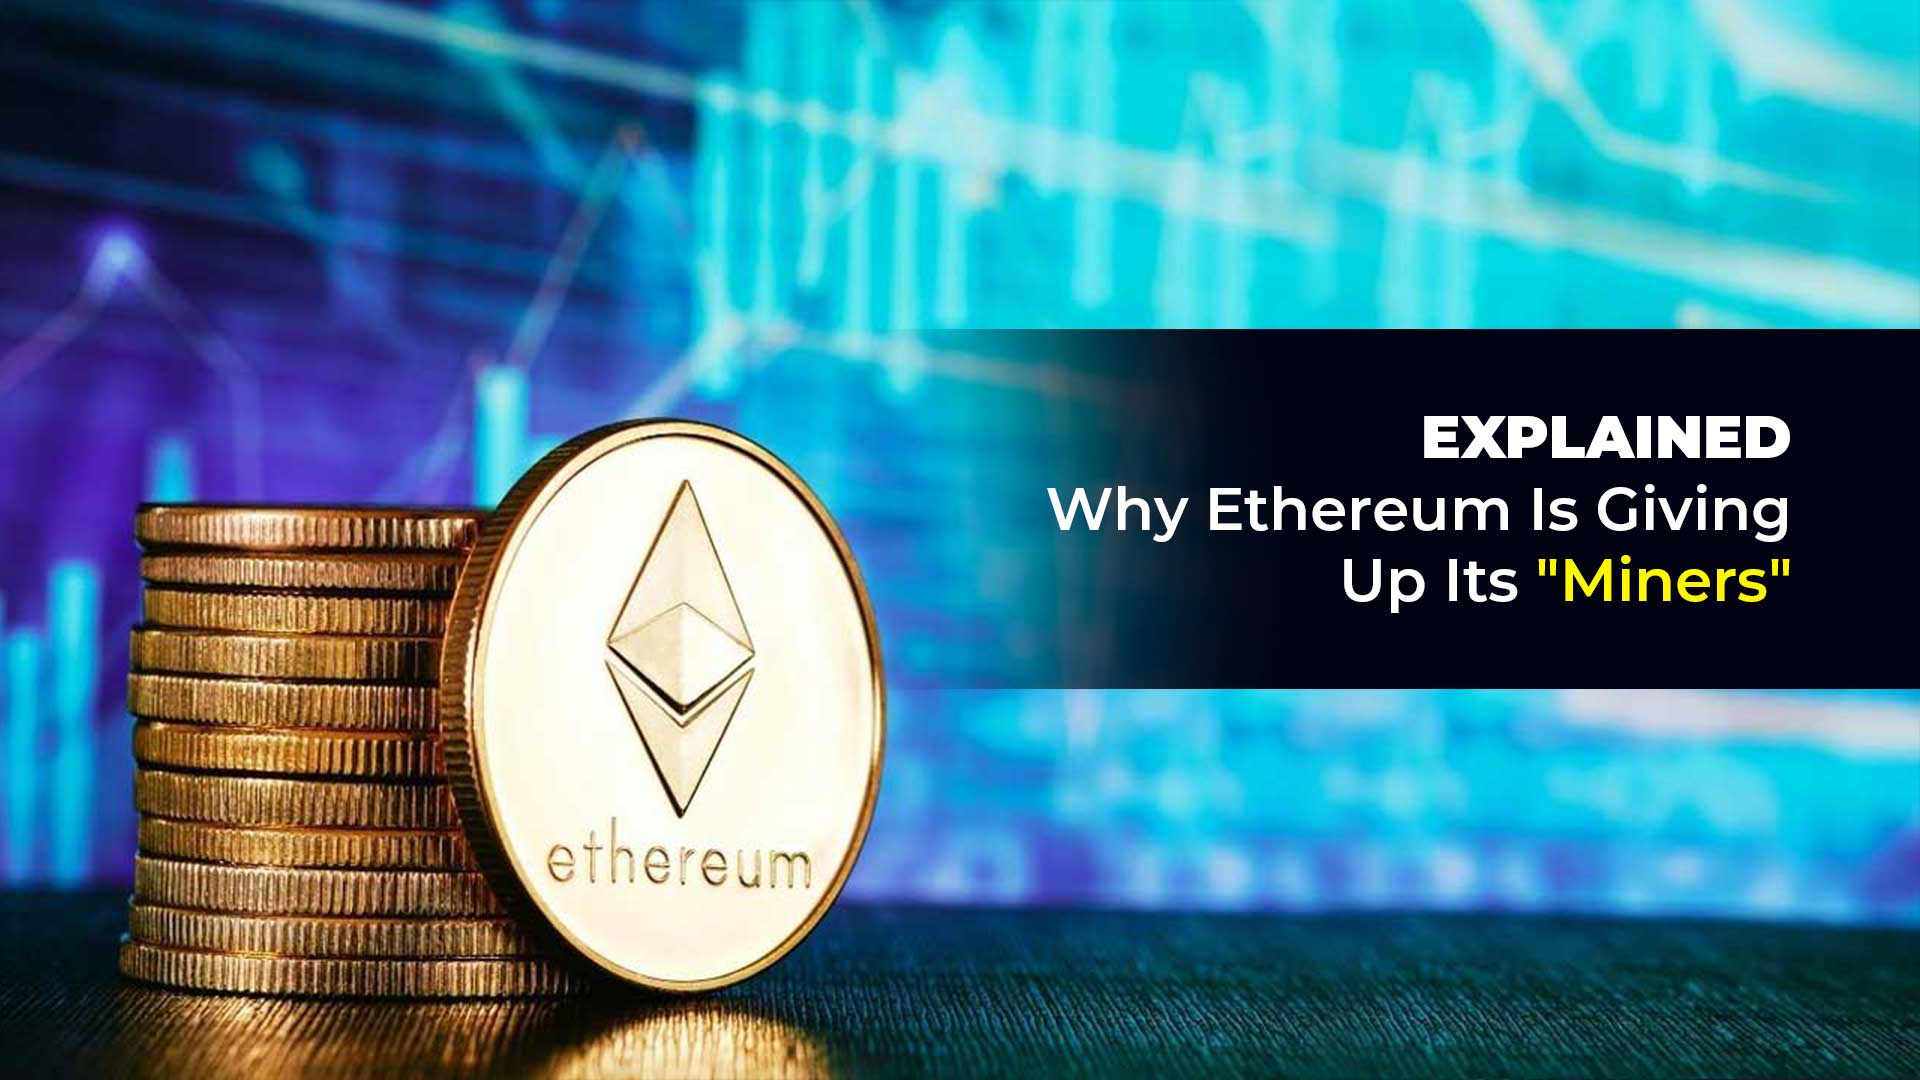 EXPLAINED: Why Ethereum Is Giving Up Its “Miners” 